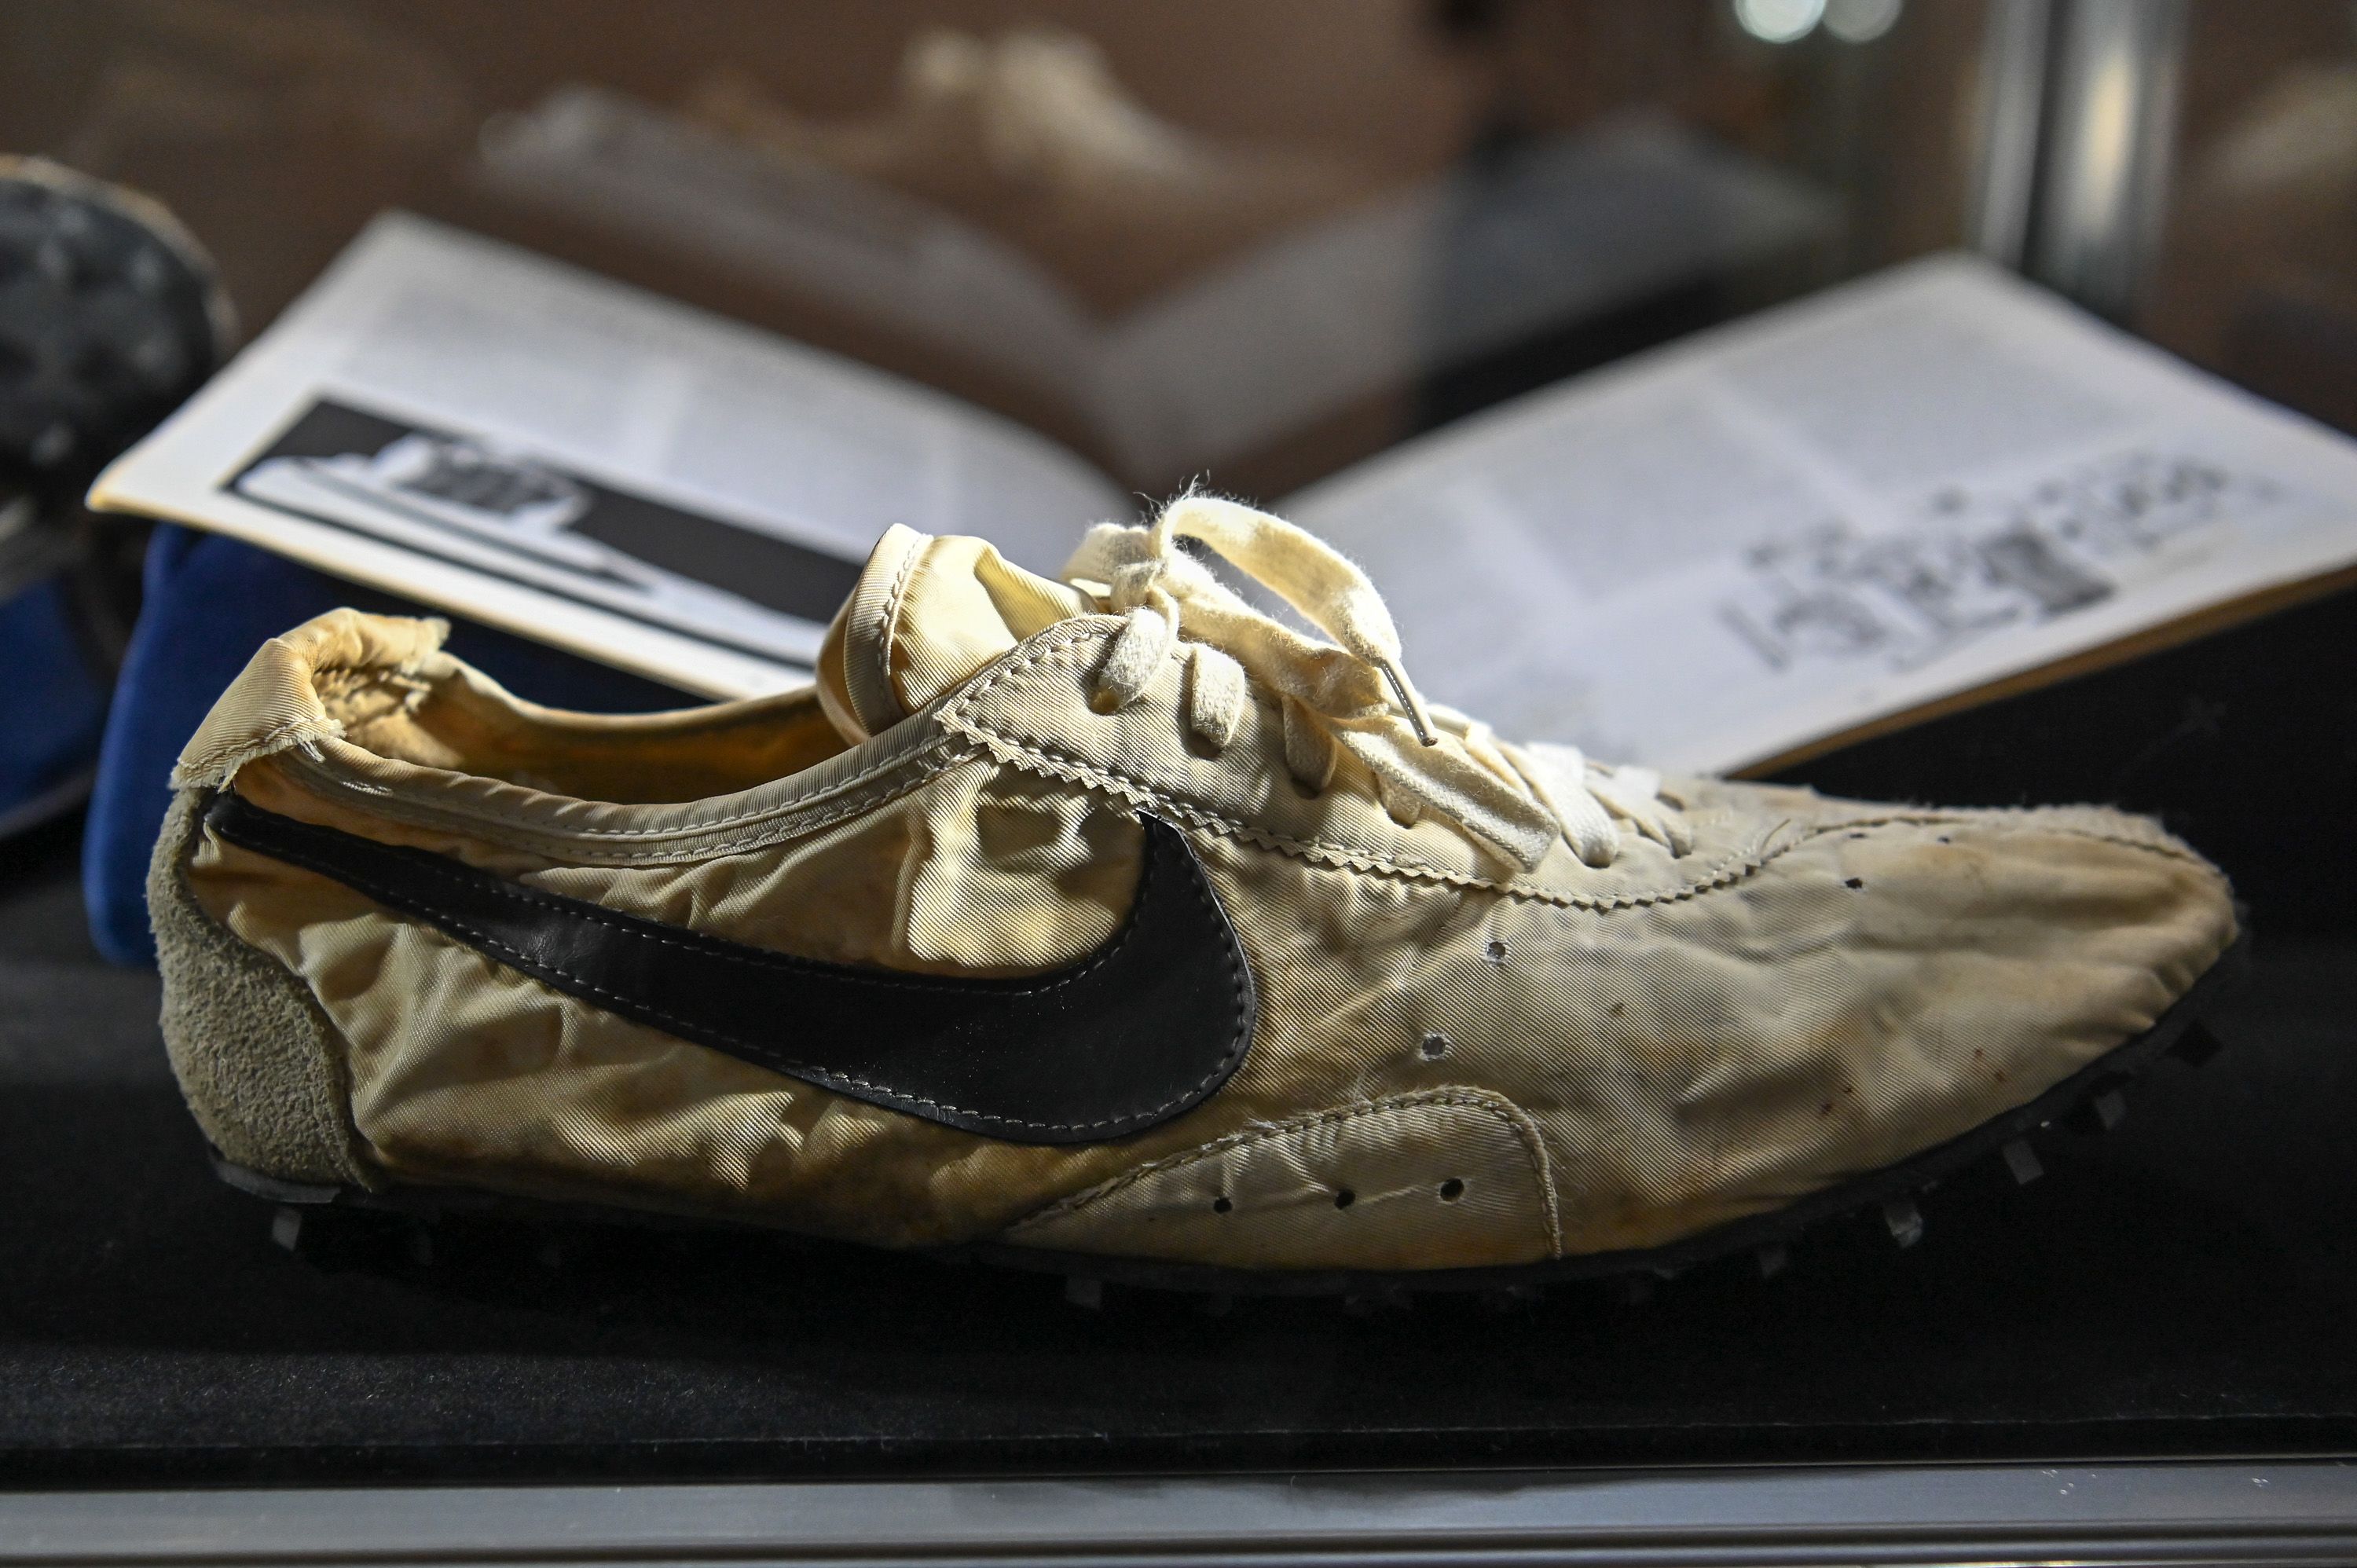 Sotheby's sells sneaker collection for $850K. Nike pair may fetch $160K